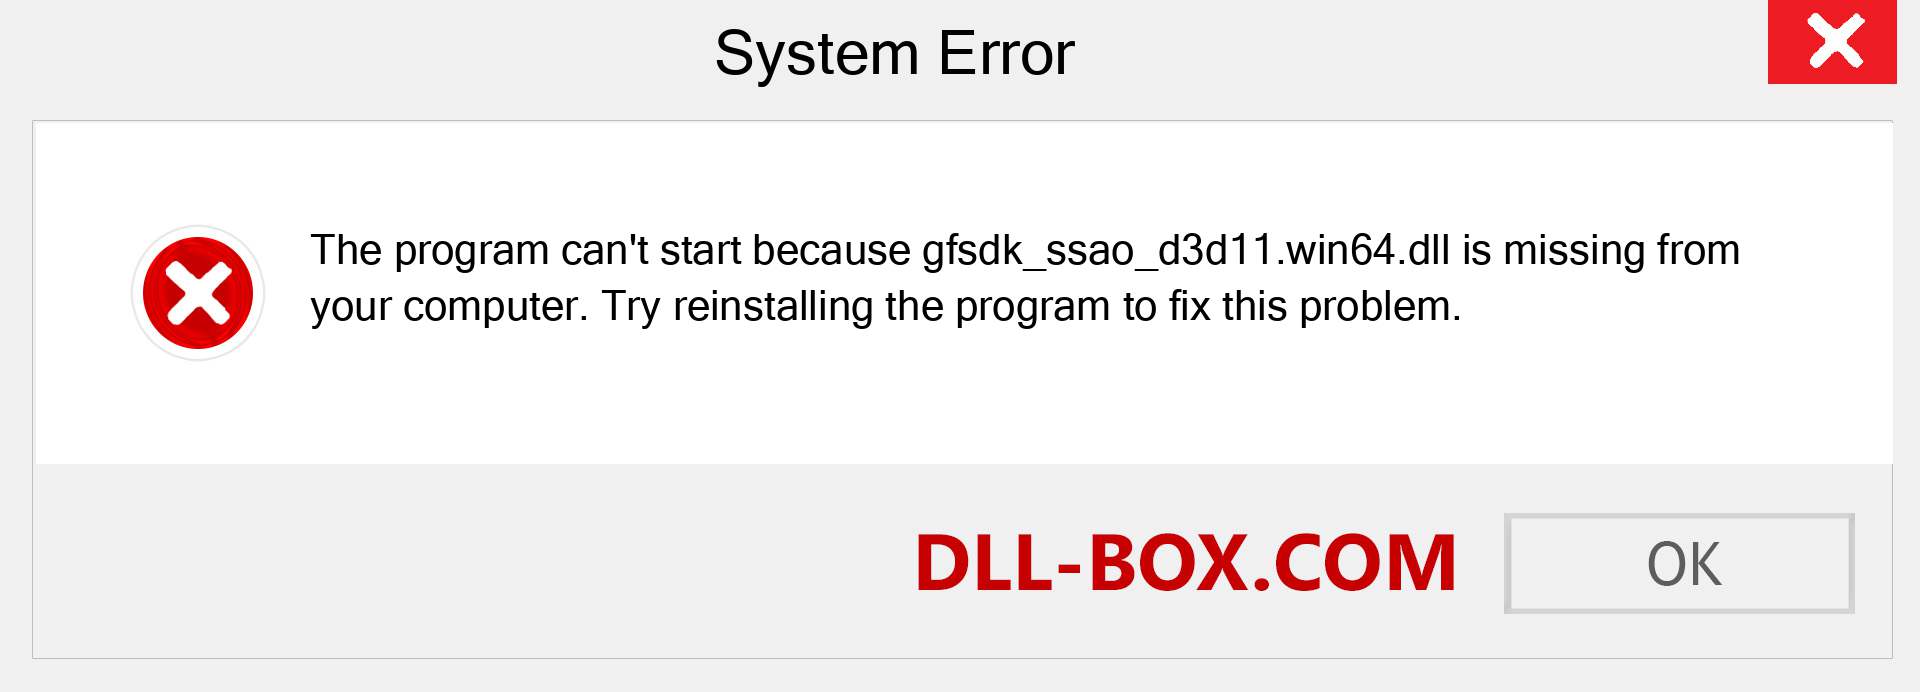  gfsdk_ssao_d3d11.win64.dll file is missing?. Download for Windows 7, 8, 10 - Fix  gfsdk_ssao_d3d11.win64 dll Missing Error on Windows, photos, images